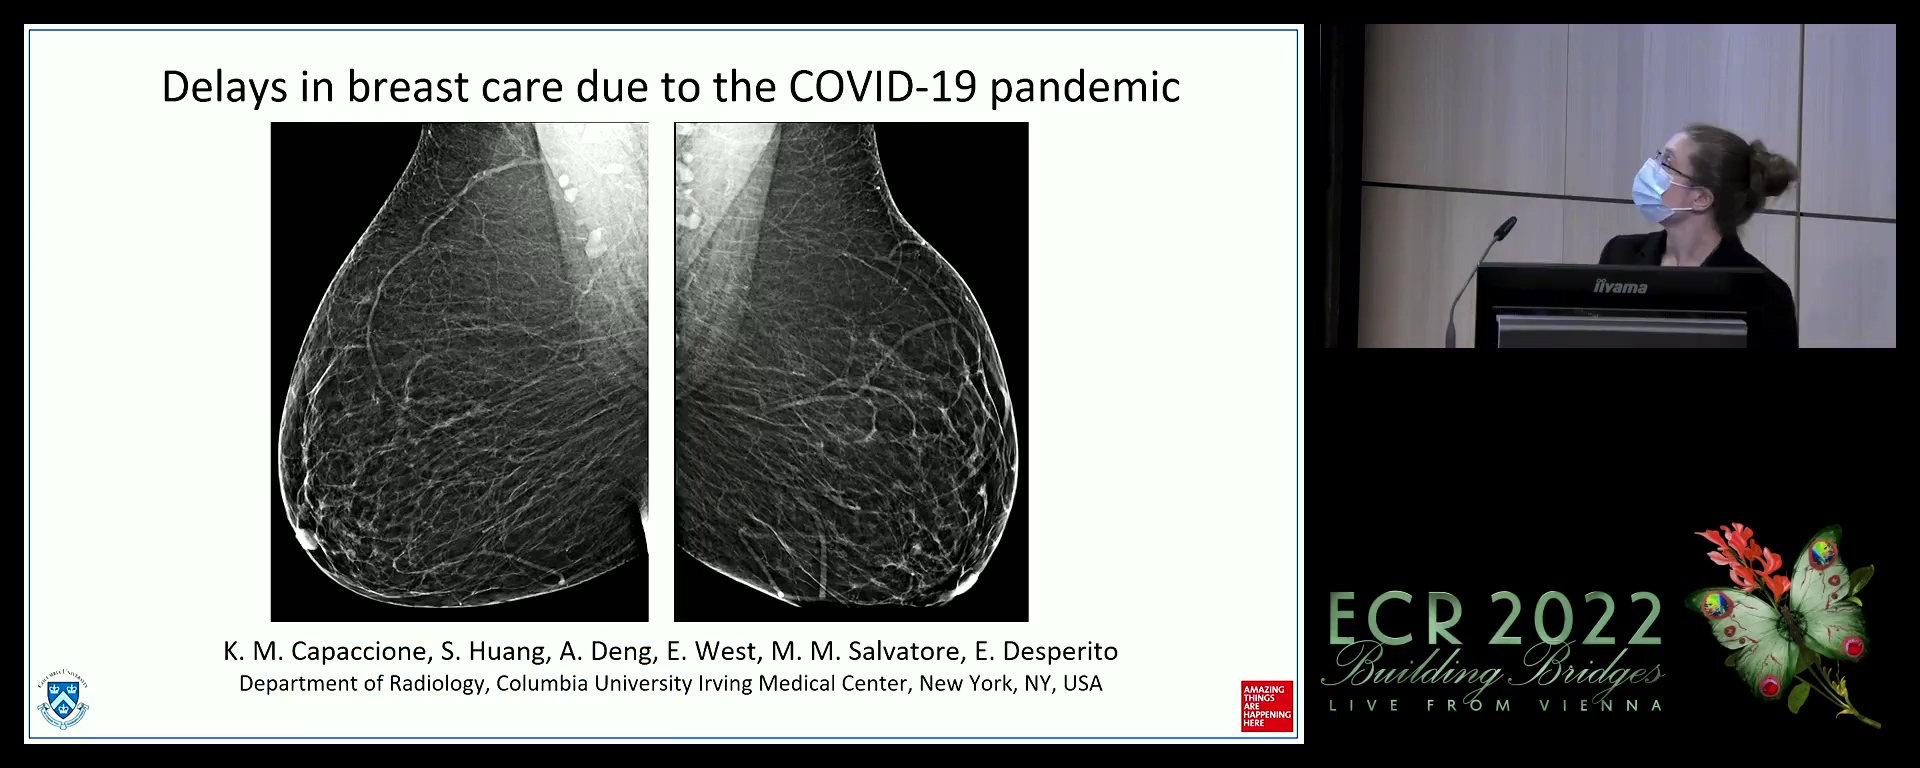 Delays in breast care due to the COVID-19 pandemic